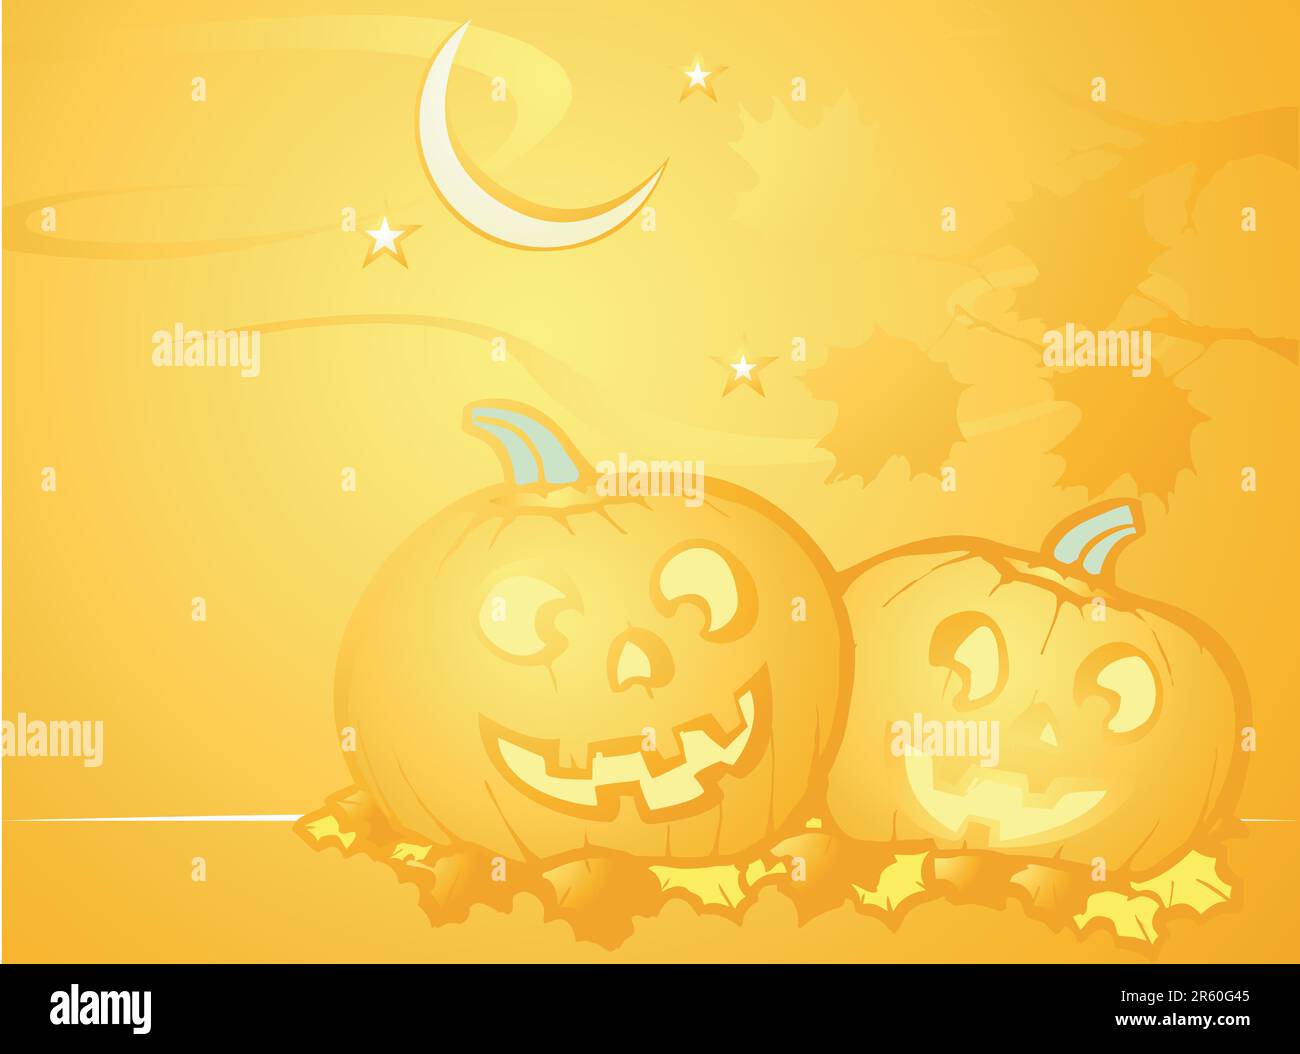 Softly orange colored desktop background, halloween themed with pumpkins. Stock Vector